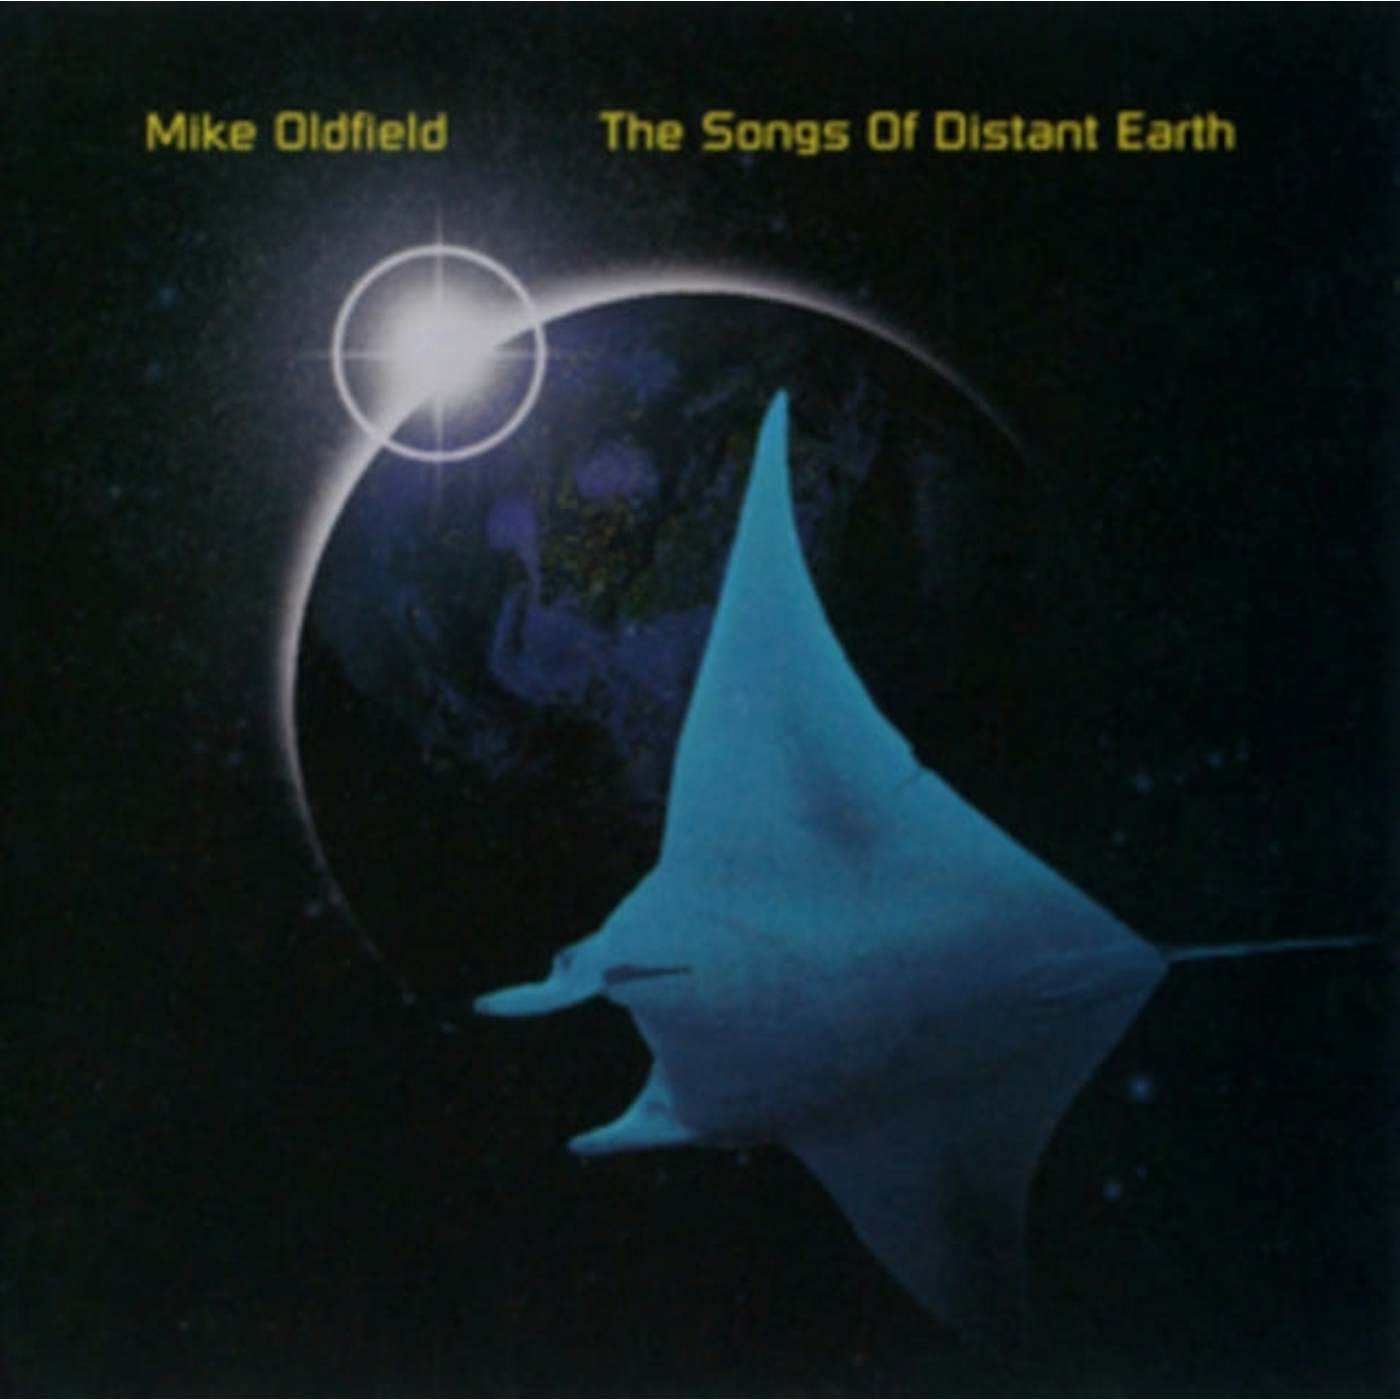 Mike Oldfield LP Vinyl Record - The Songs Of Distant Earth